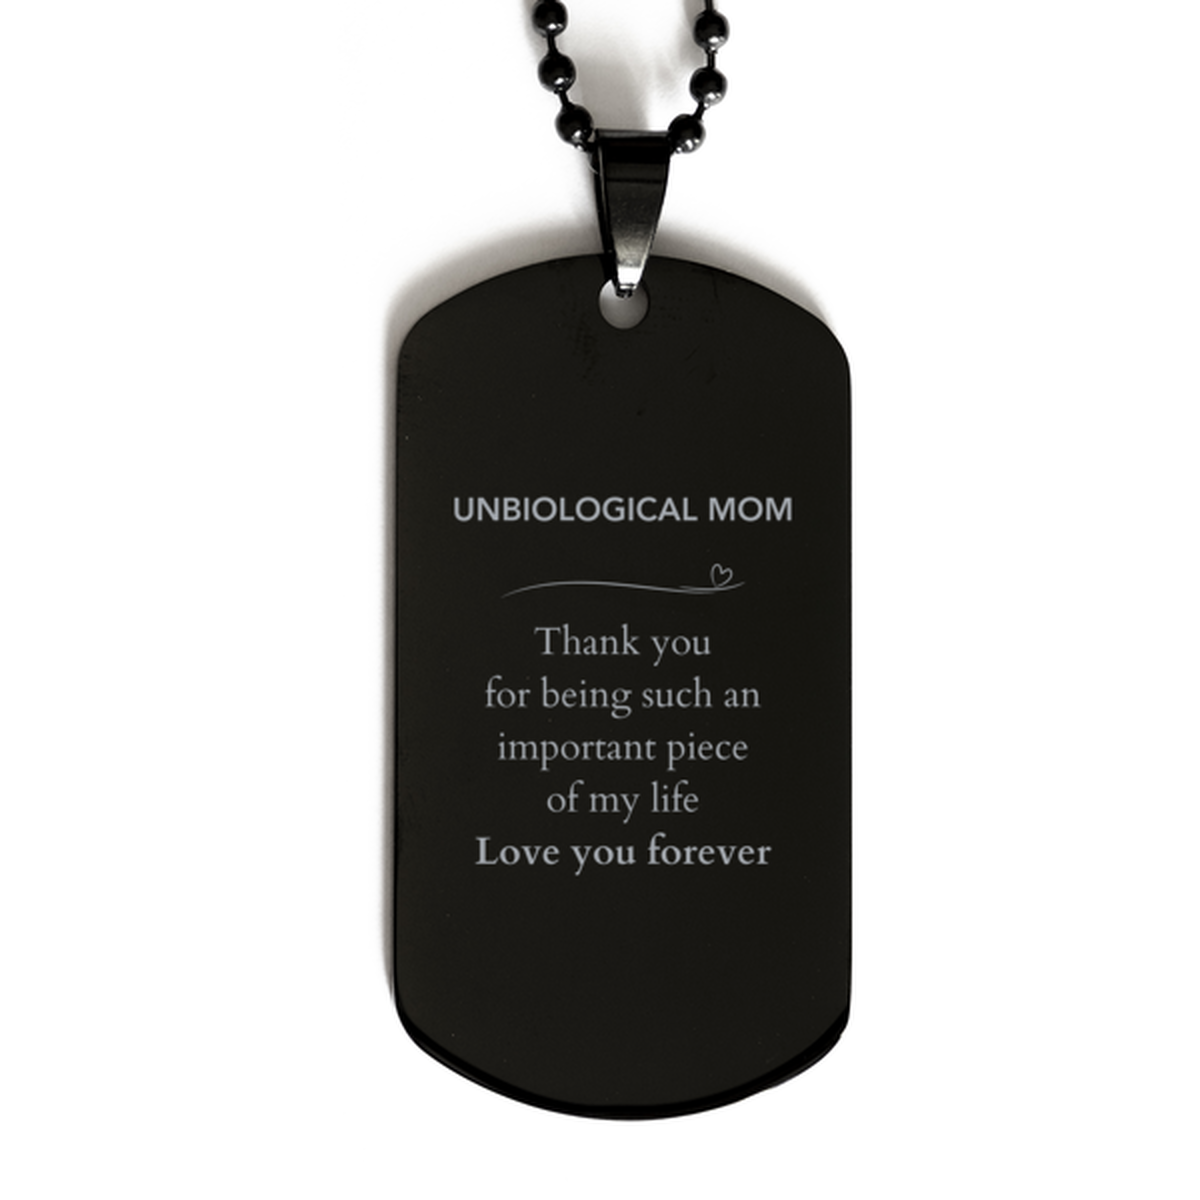 Appropriate Unbiological Mom Black Dog Tag Epic Birthday Gifts for Unbiological Mom Thank you for being such an important piece of my life Unbiological Mom Christmas Mothers Fathers Day